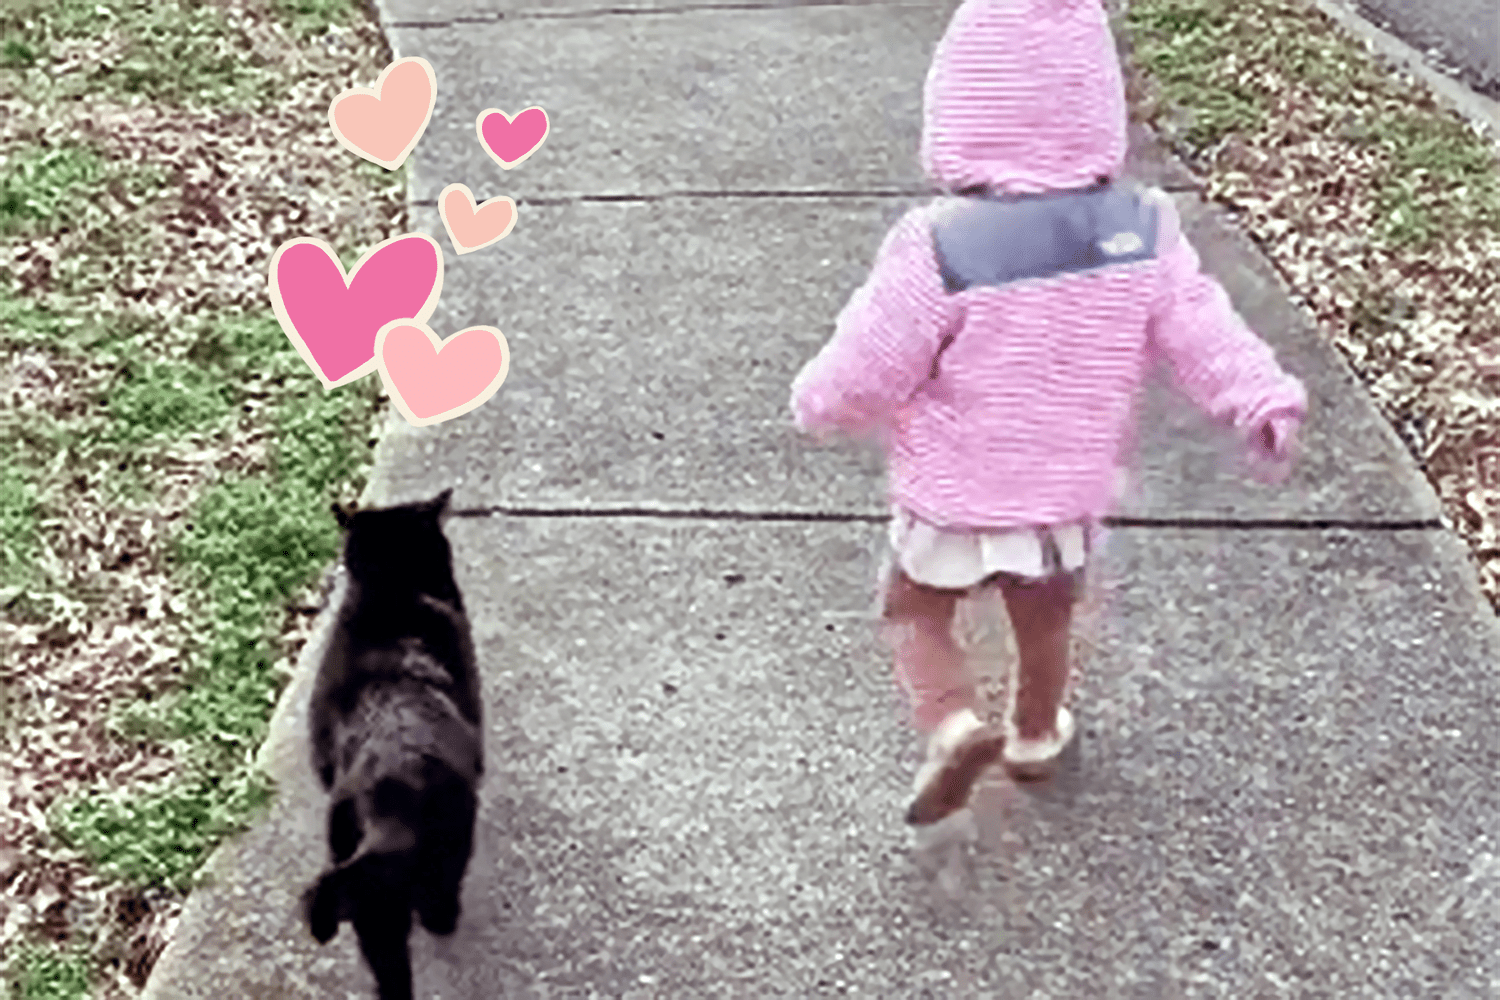 youngster and cat tiktok; toddler walking down the sidewalk with the neighbor's cat